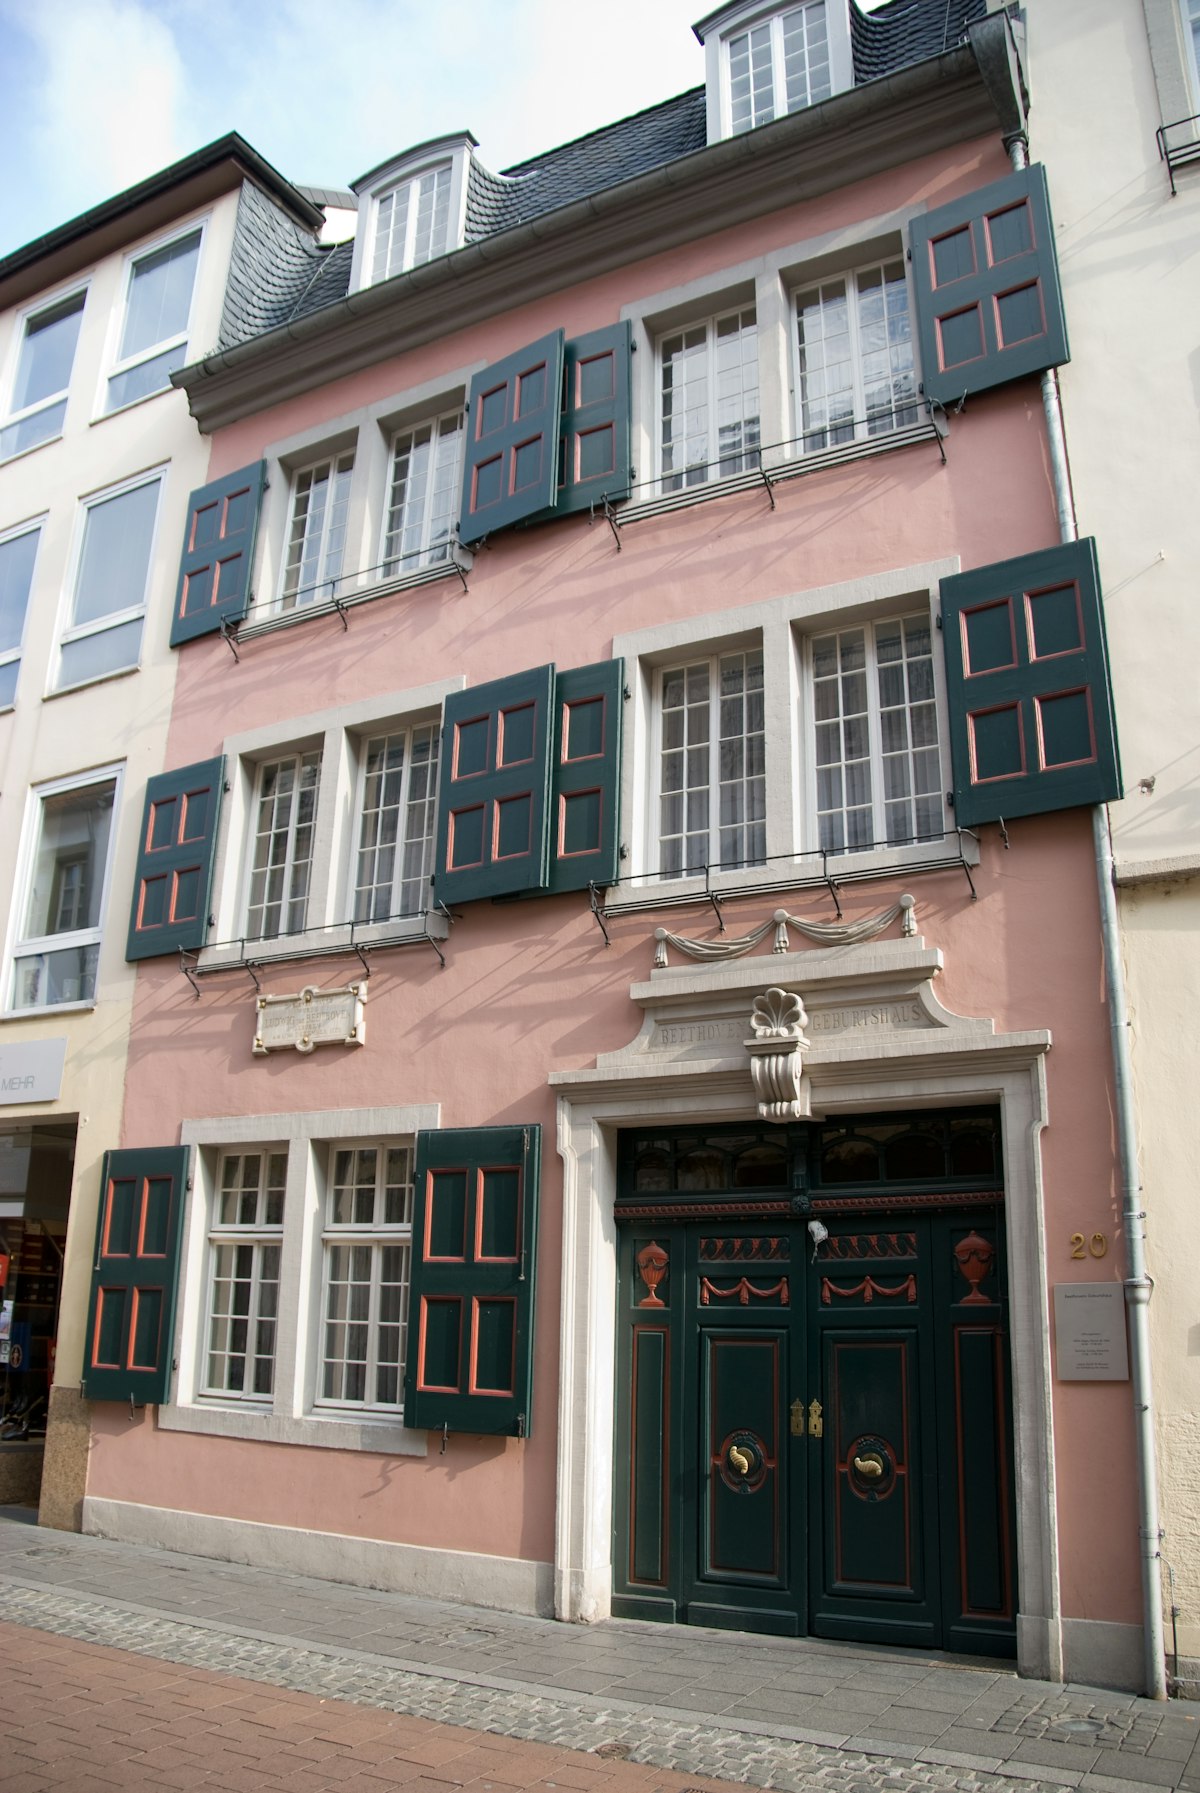 The house of birth of Ludwig van Beethoven in Bonn, Germany.